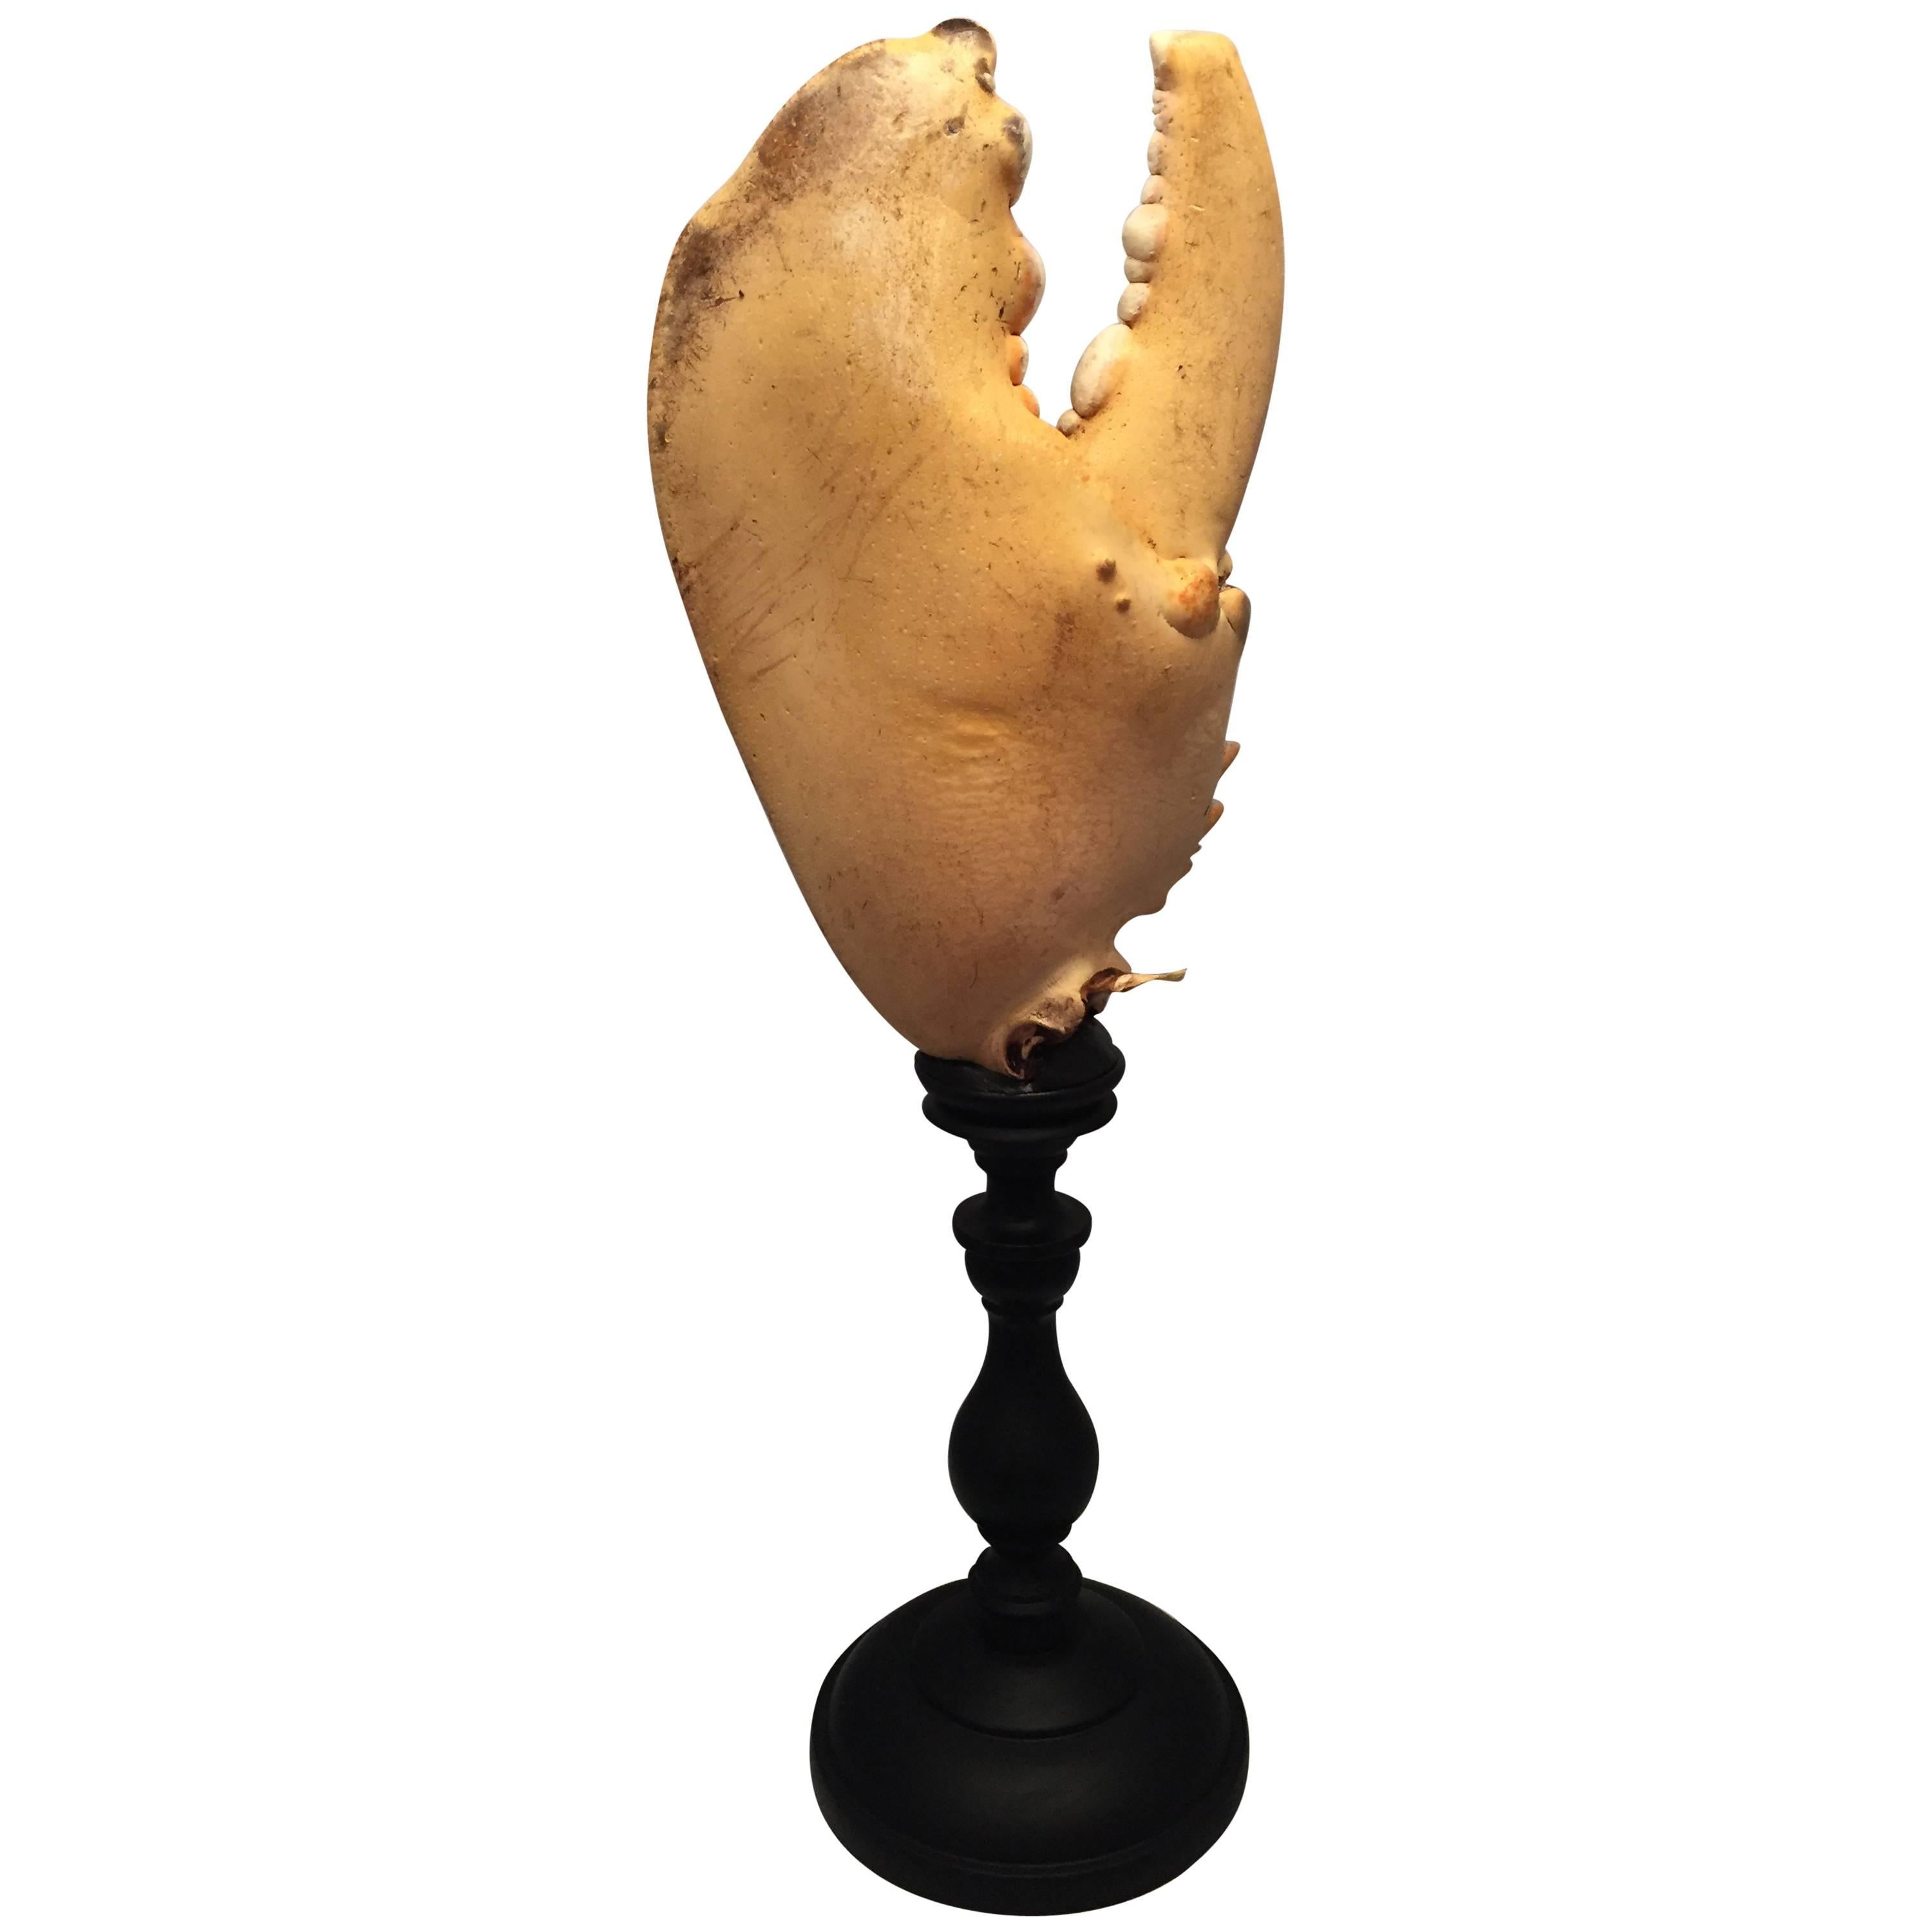 Large Maine Lobster Claw Mounted on a Turned Wooden Base